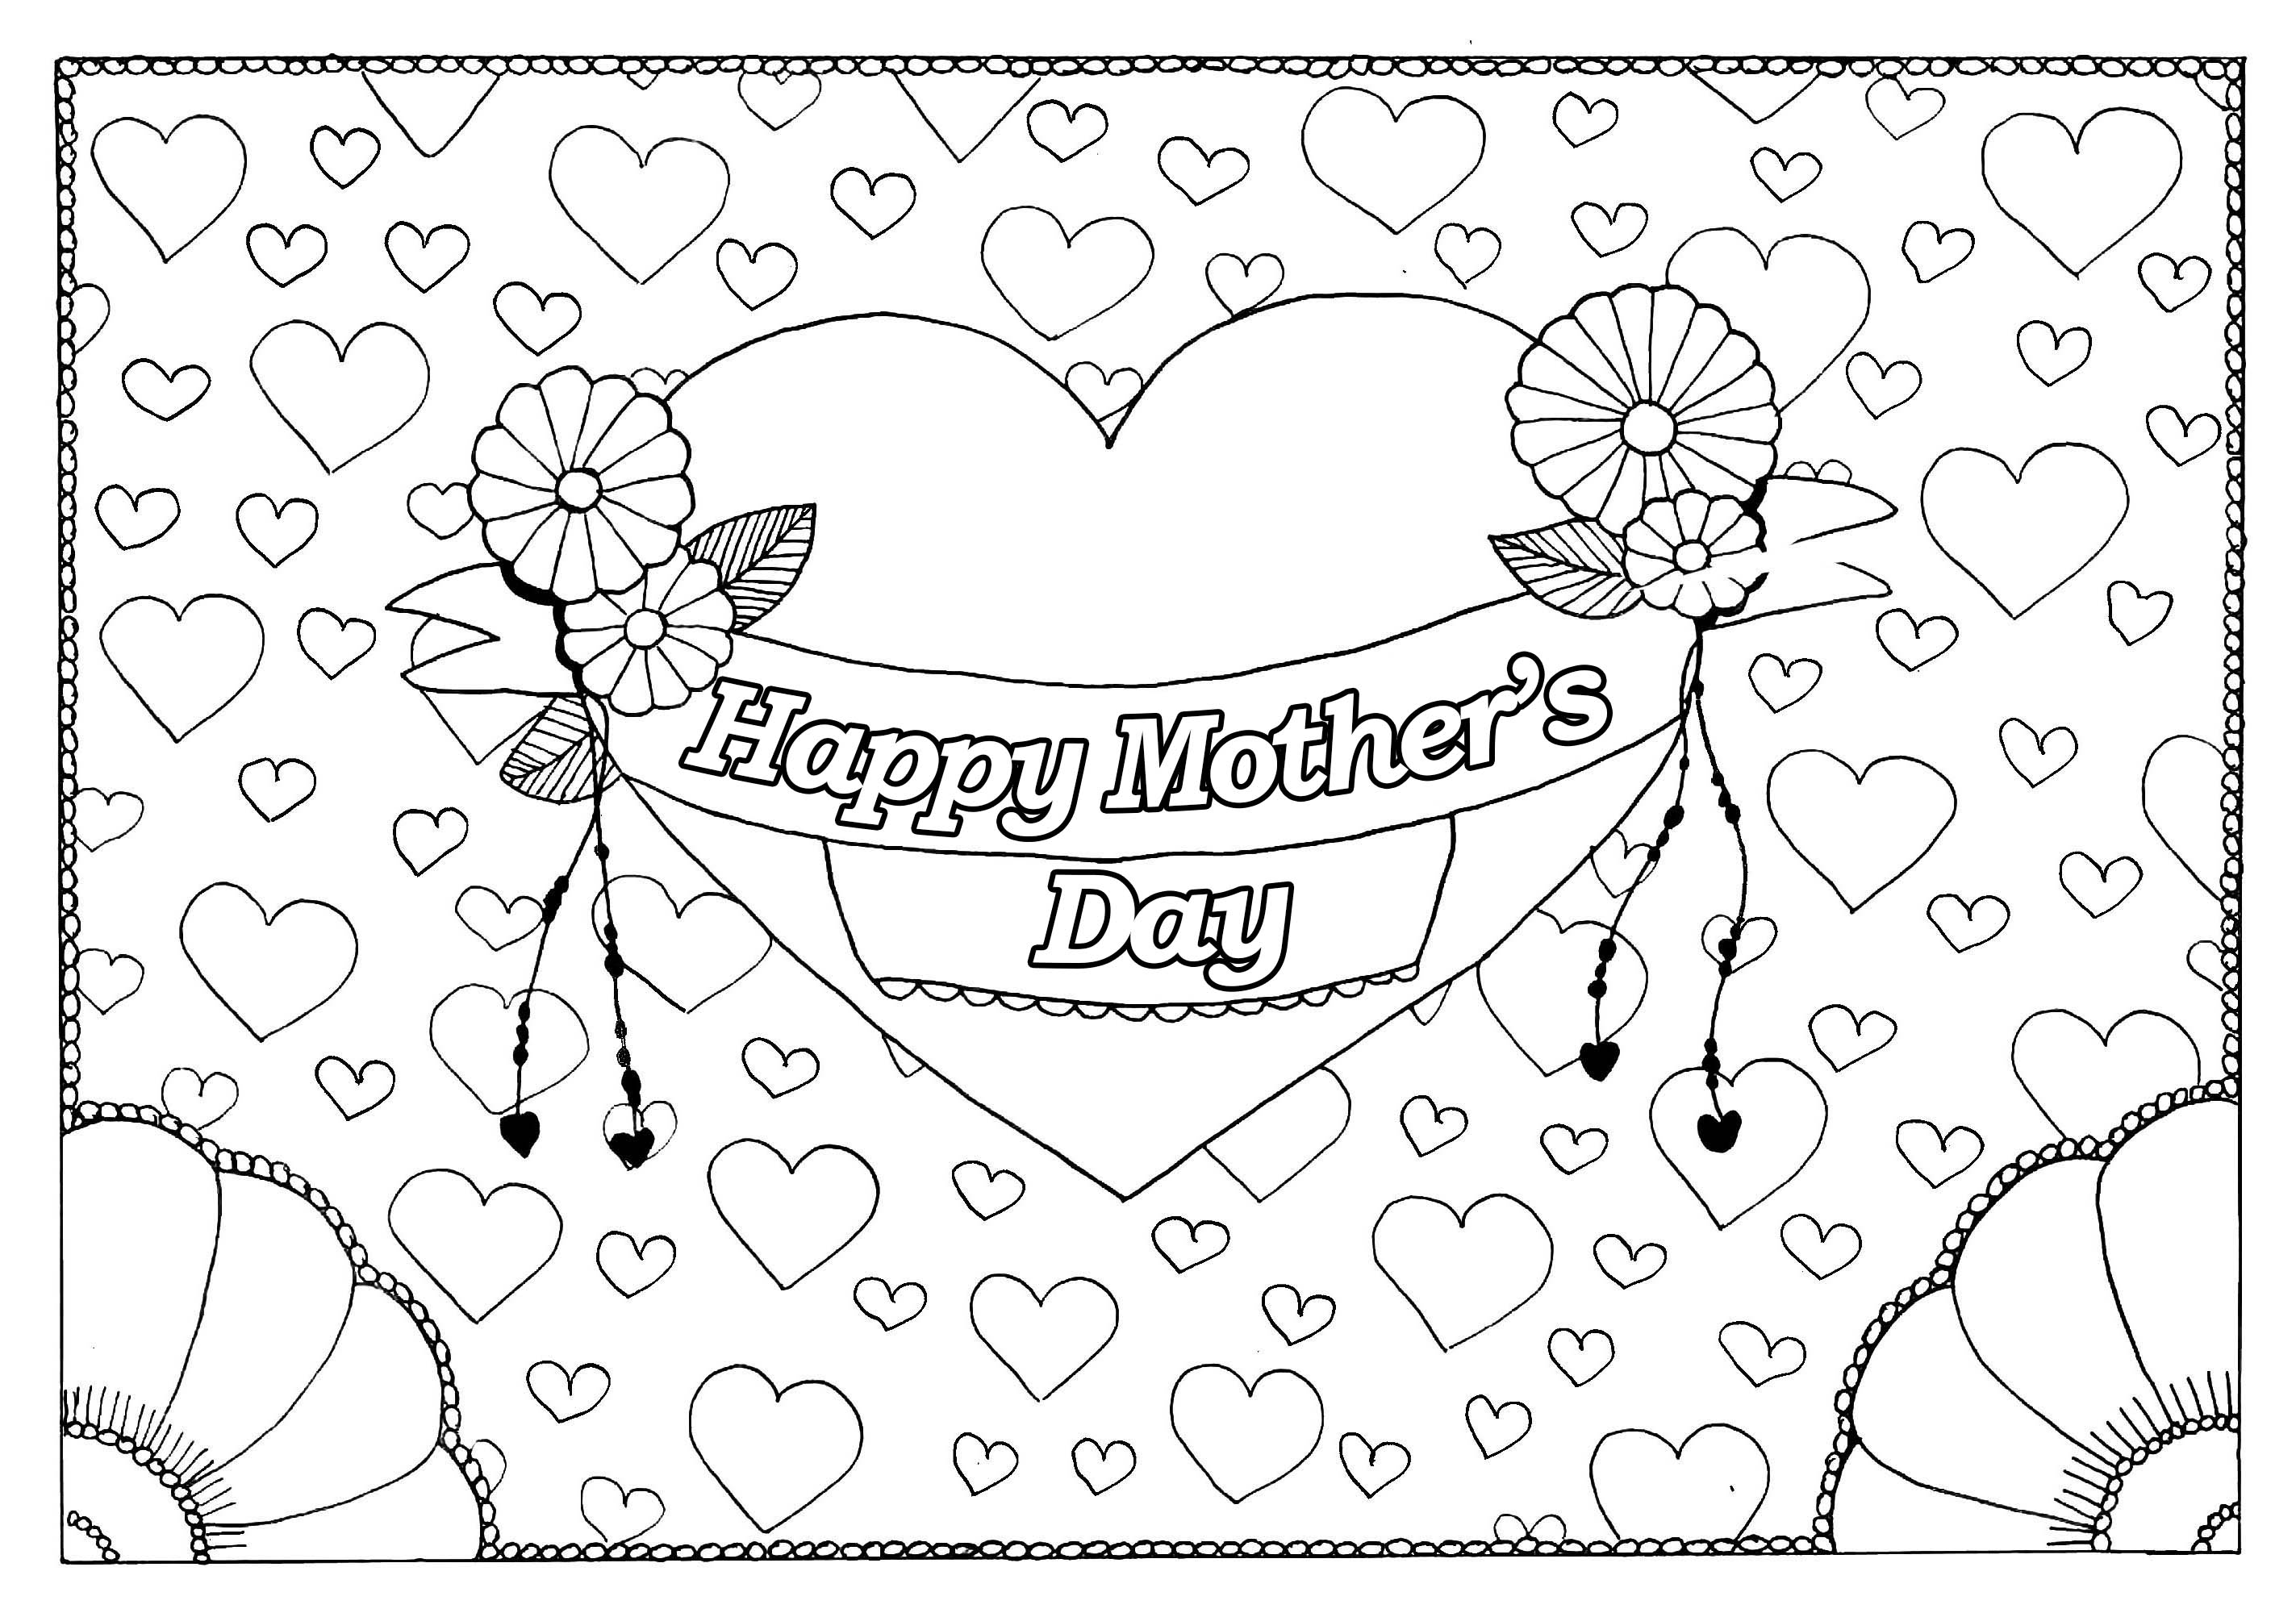 Mother's day coloring page : Big & little hearts, Artist : Pauline